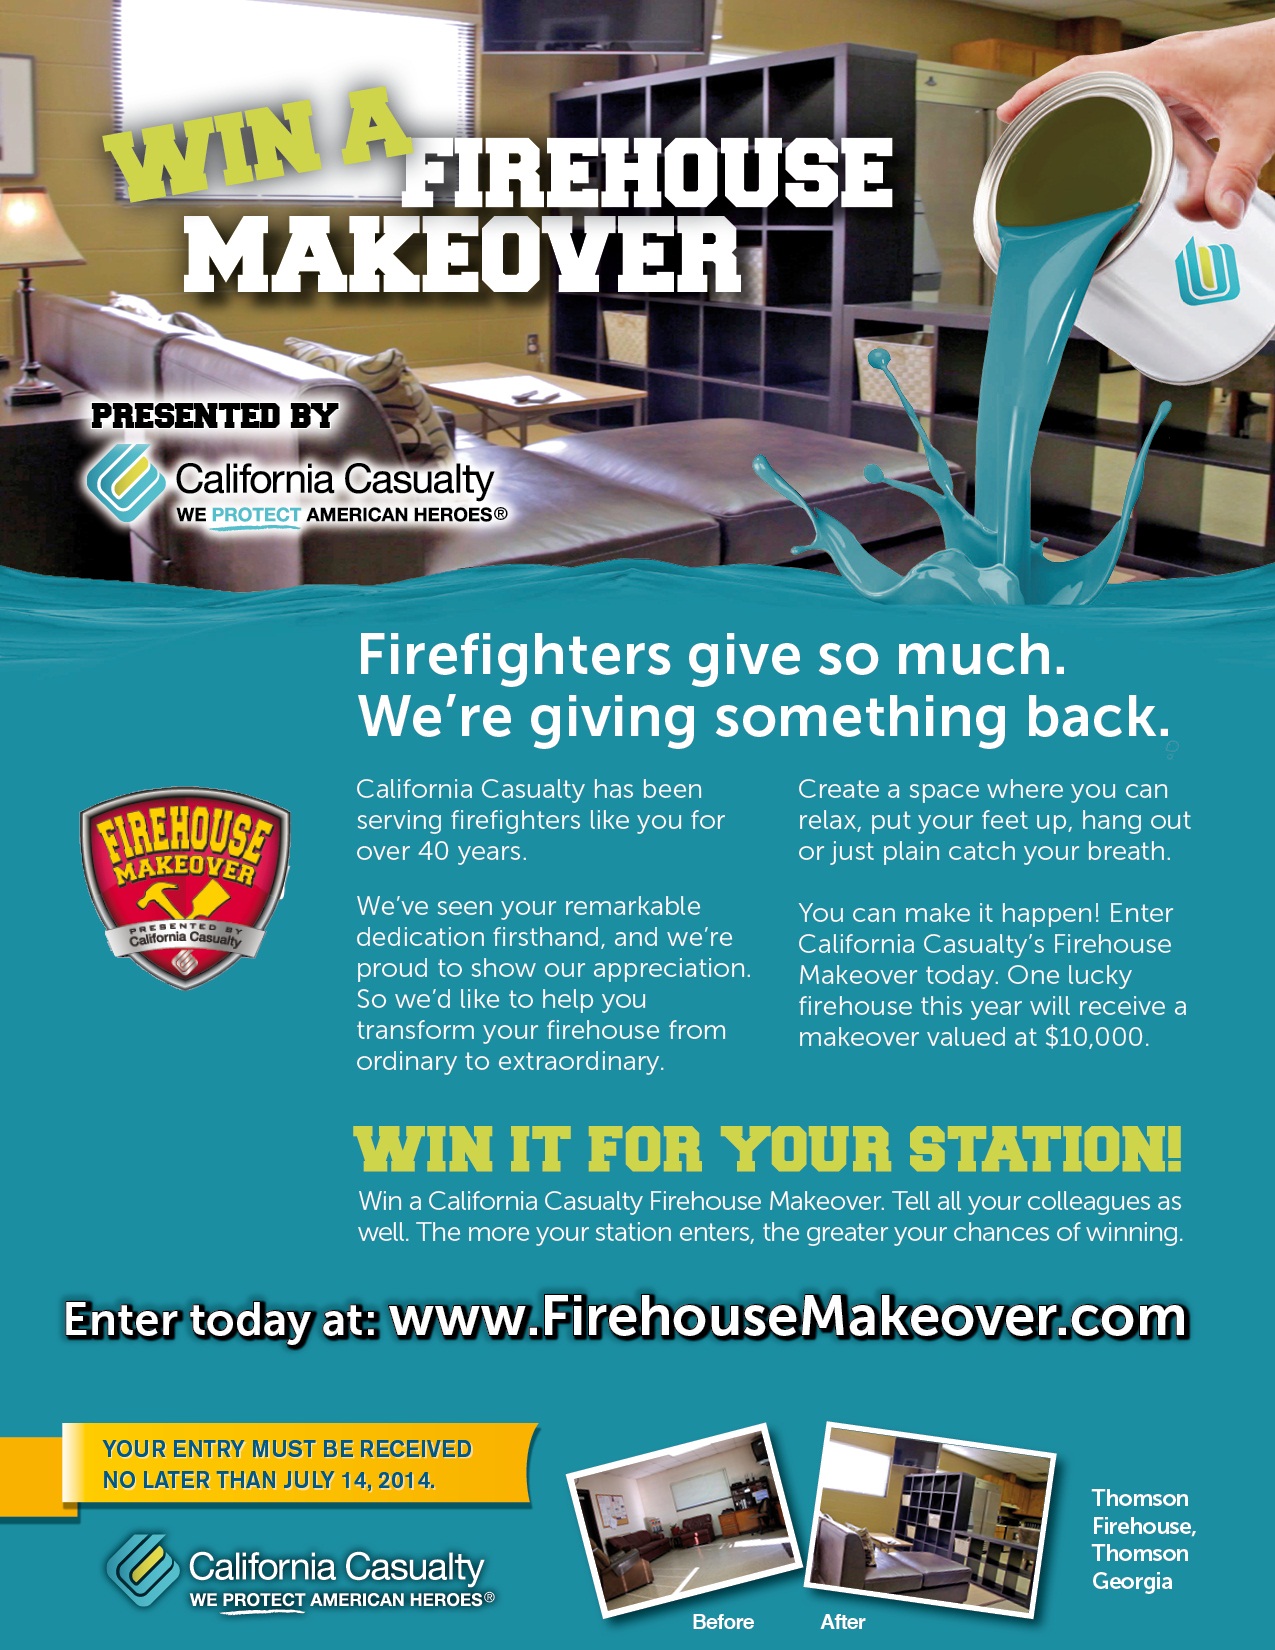 California Casualty's Firehouse Makeover